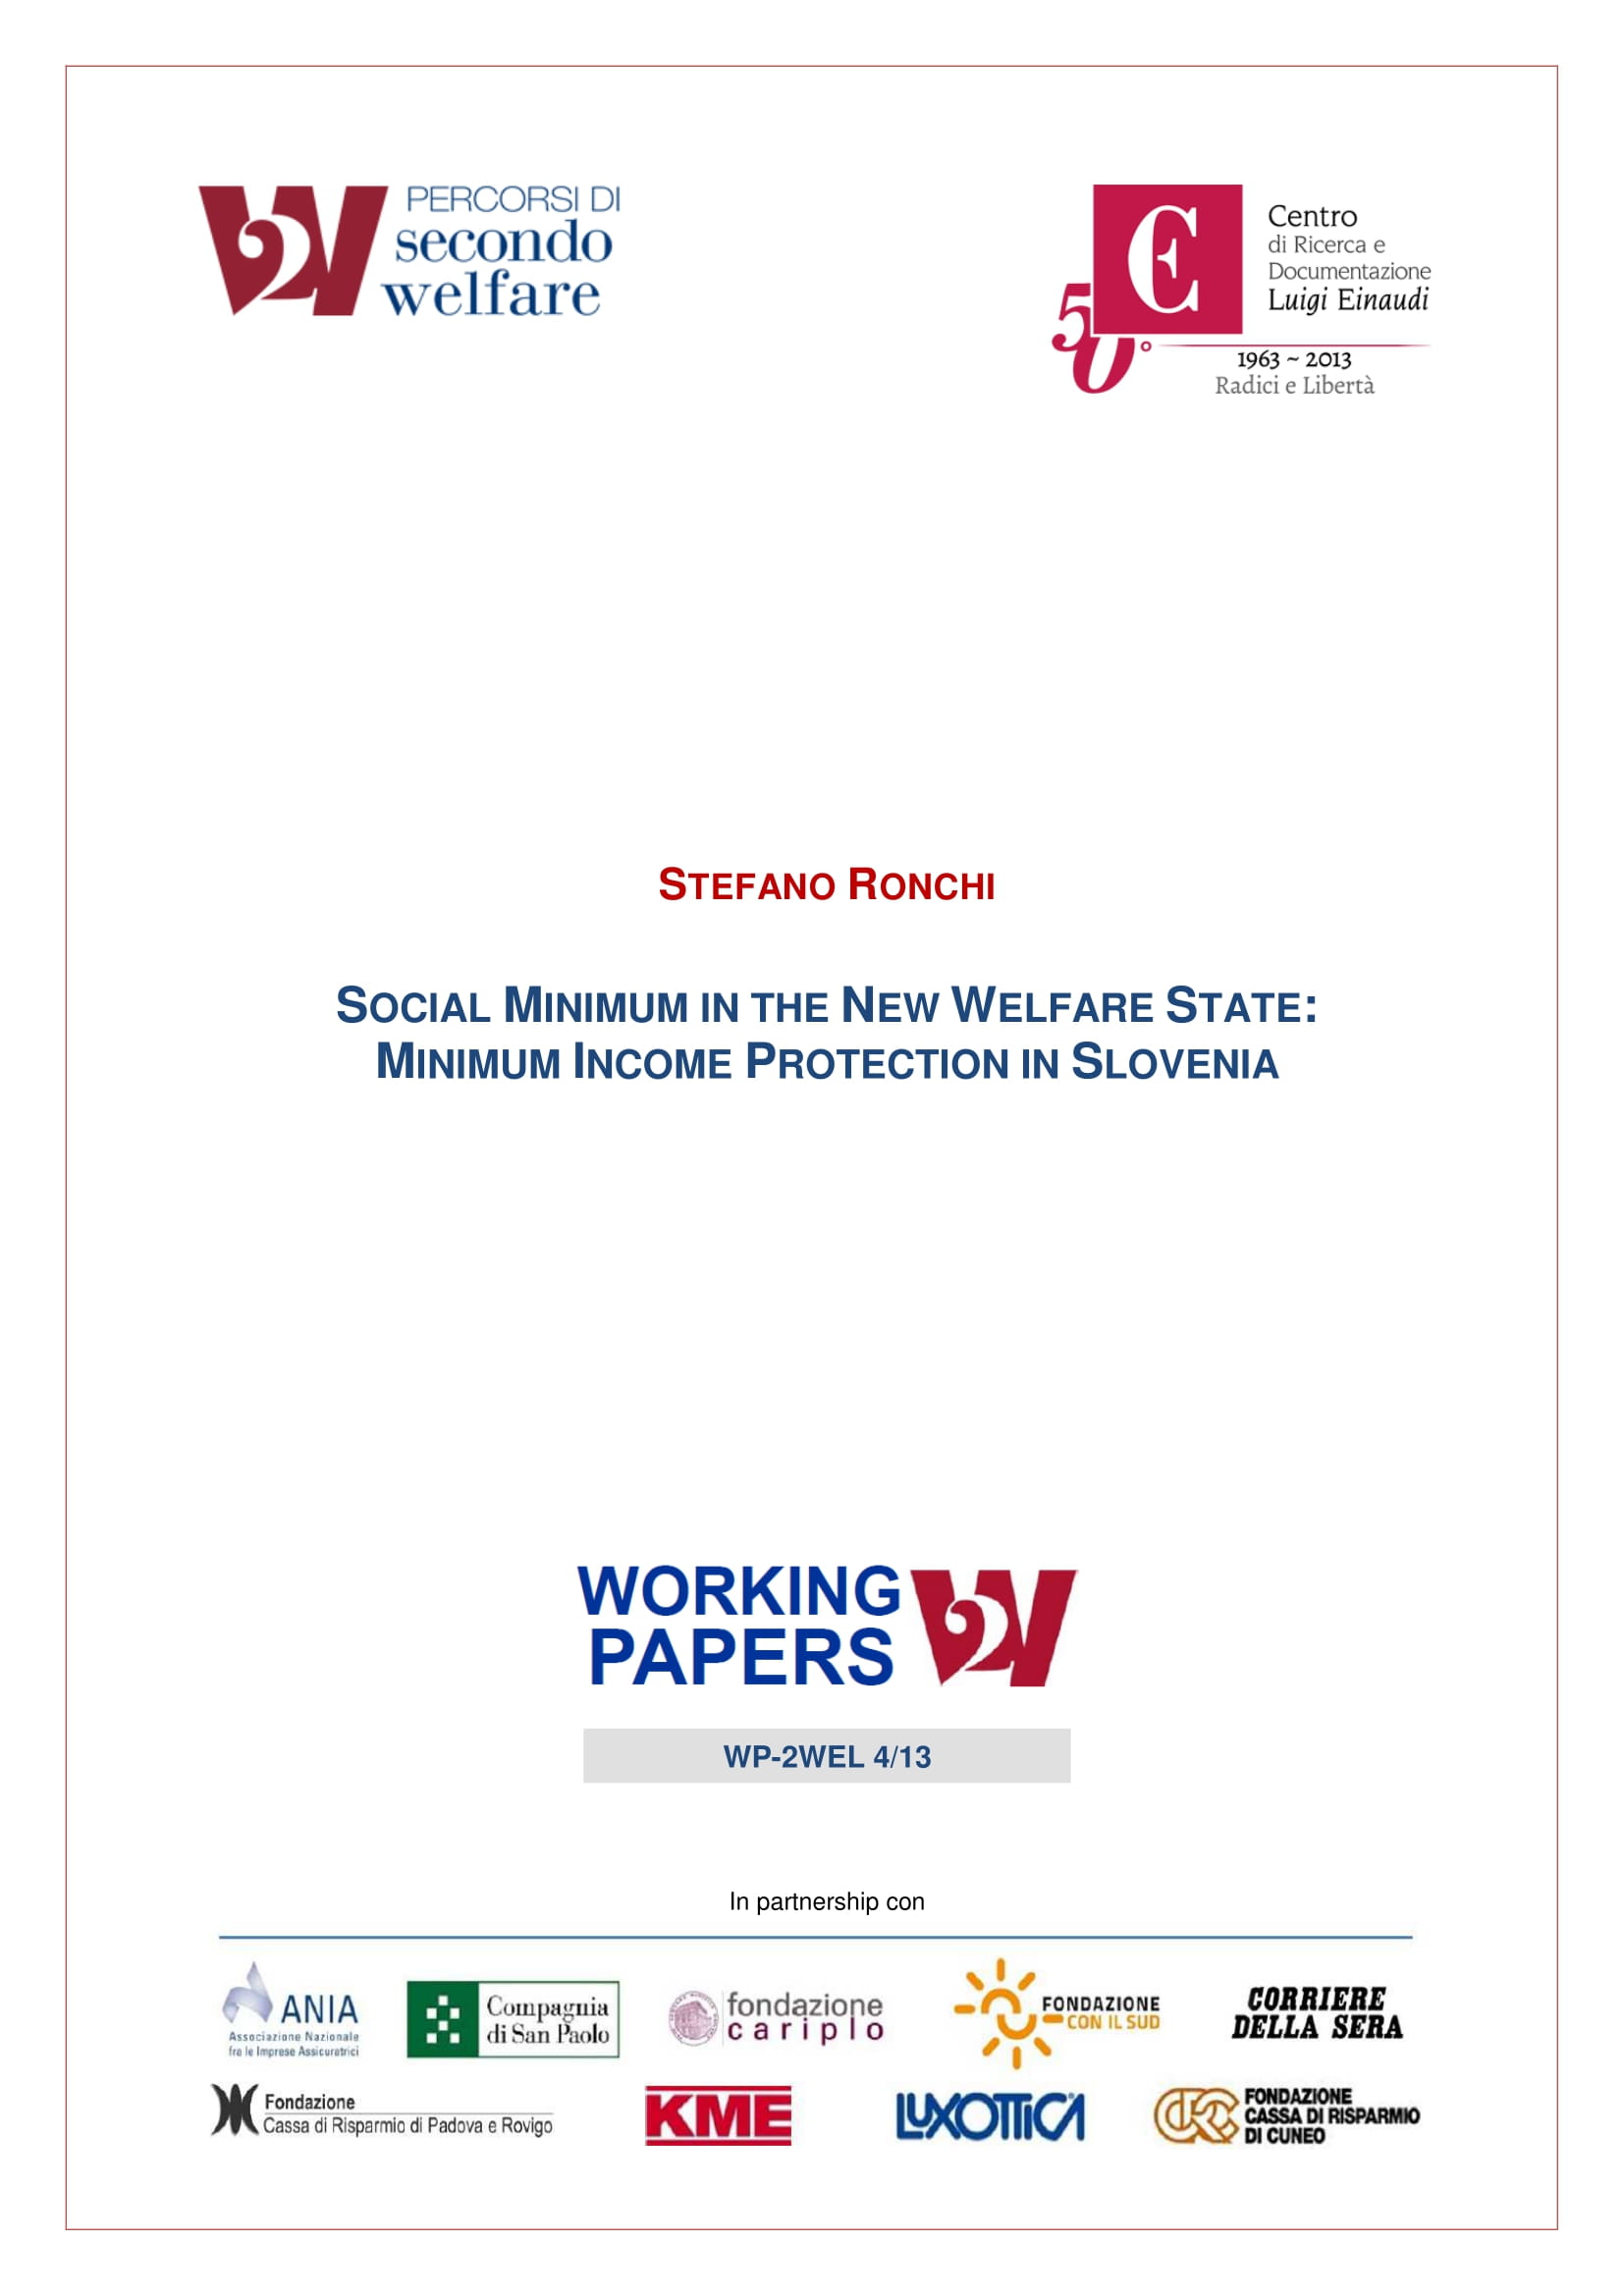 Social minimum in the new welfare state: minimum income protection in Slovenia